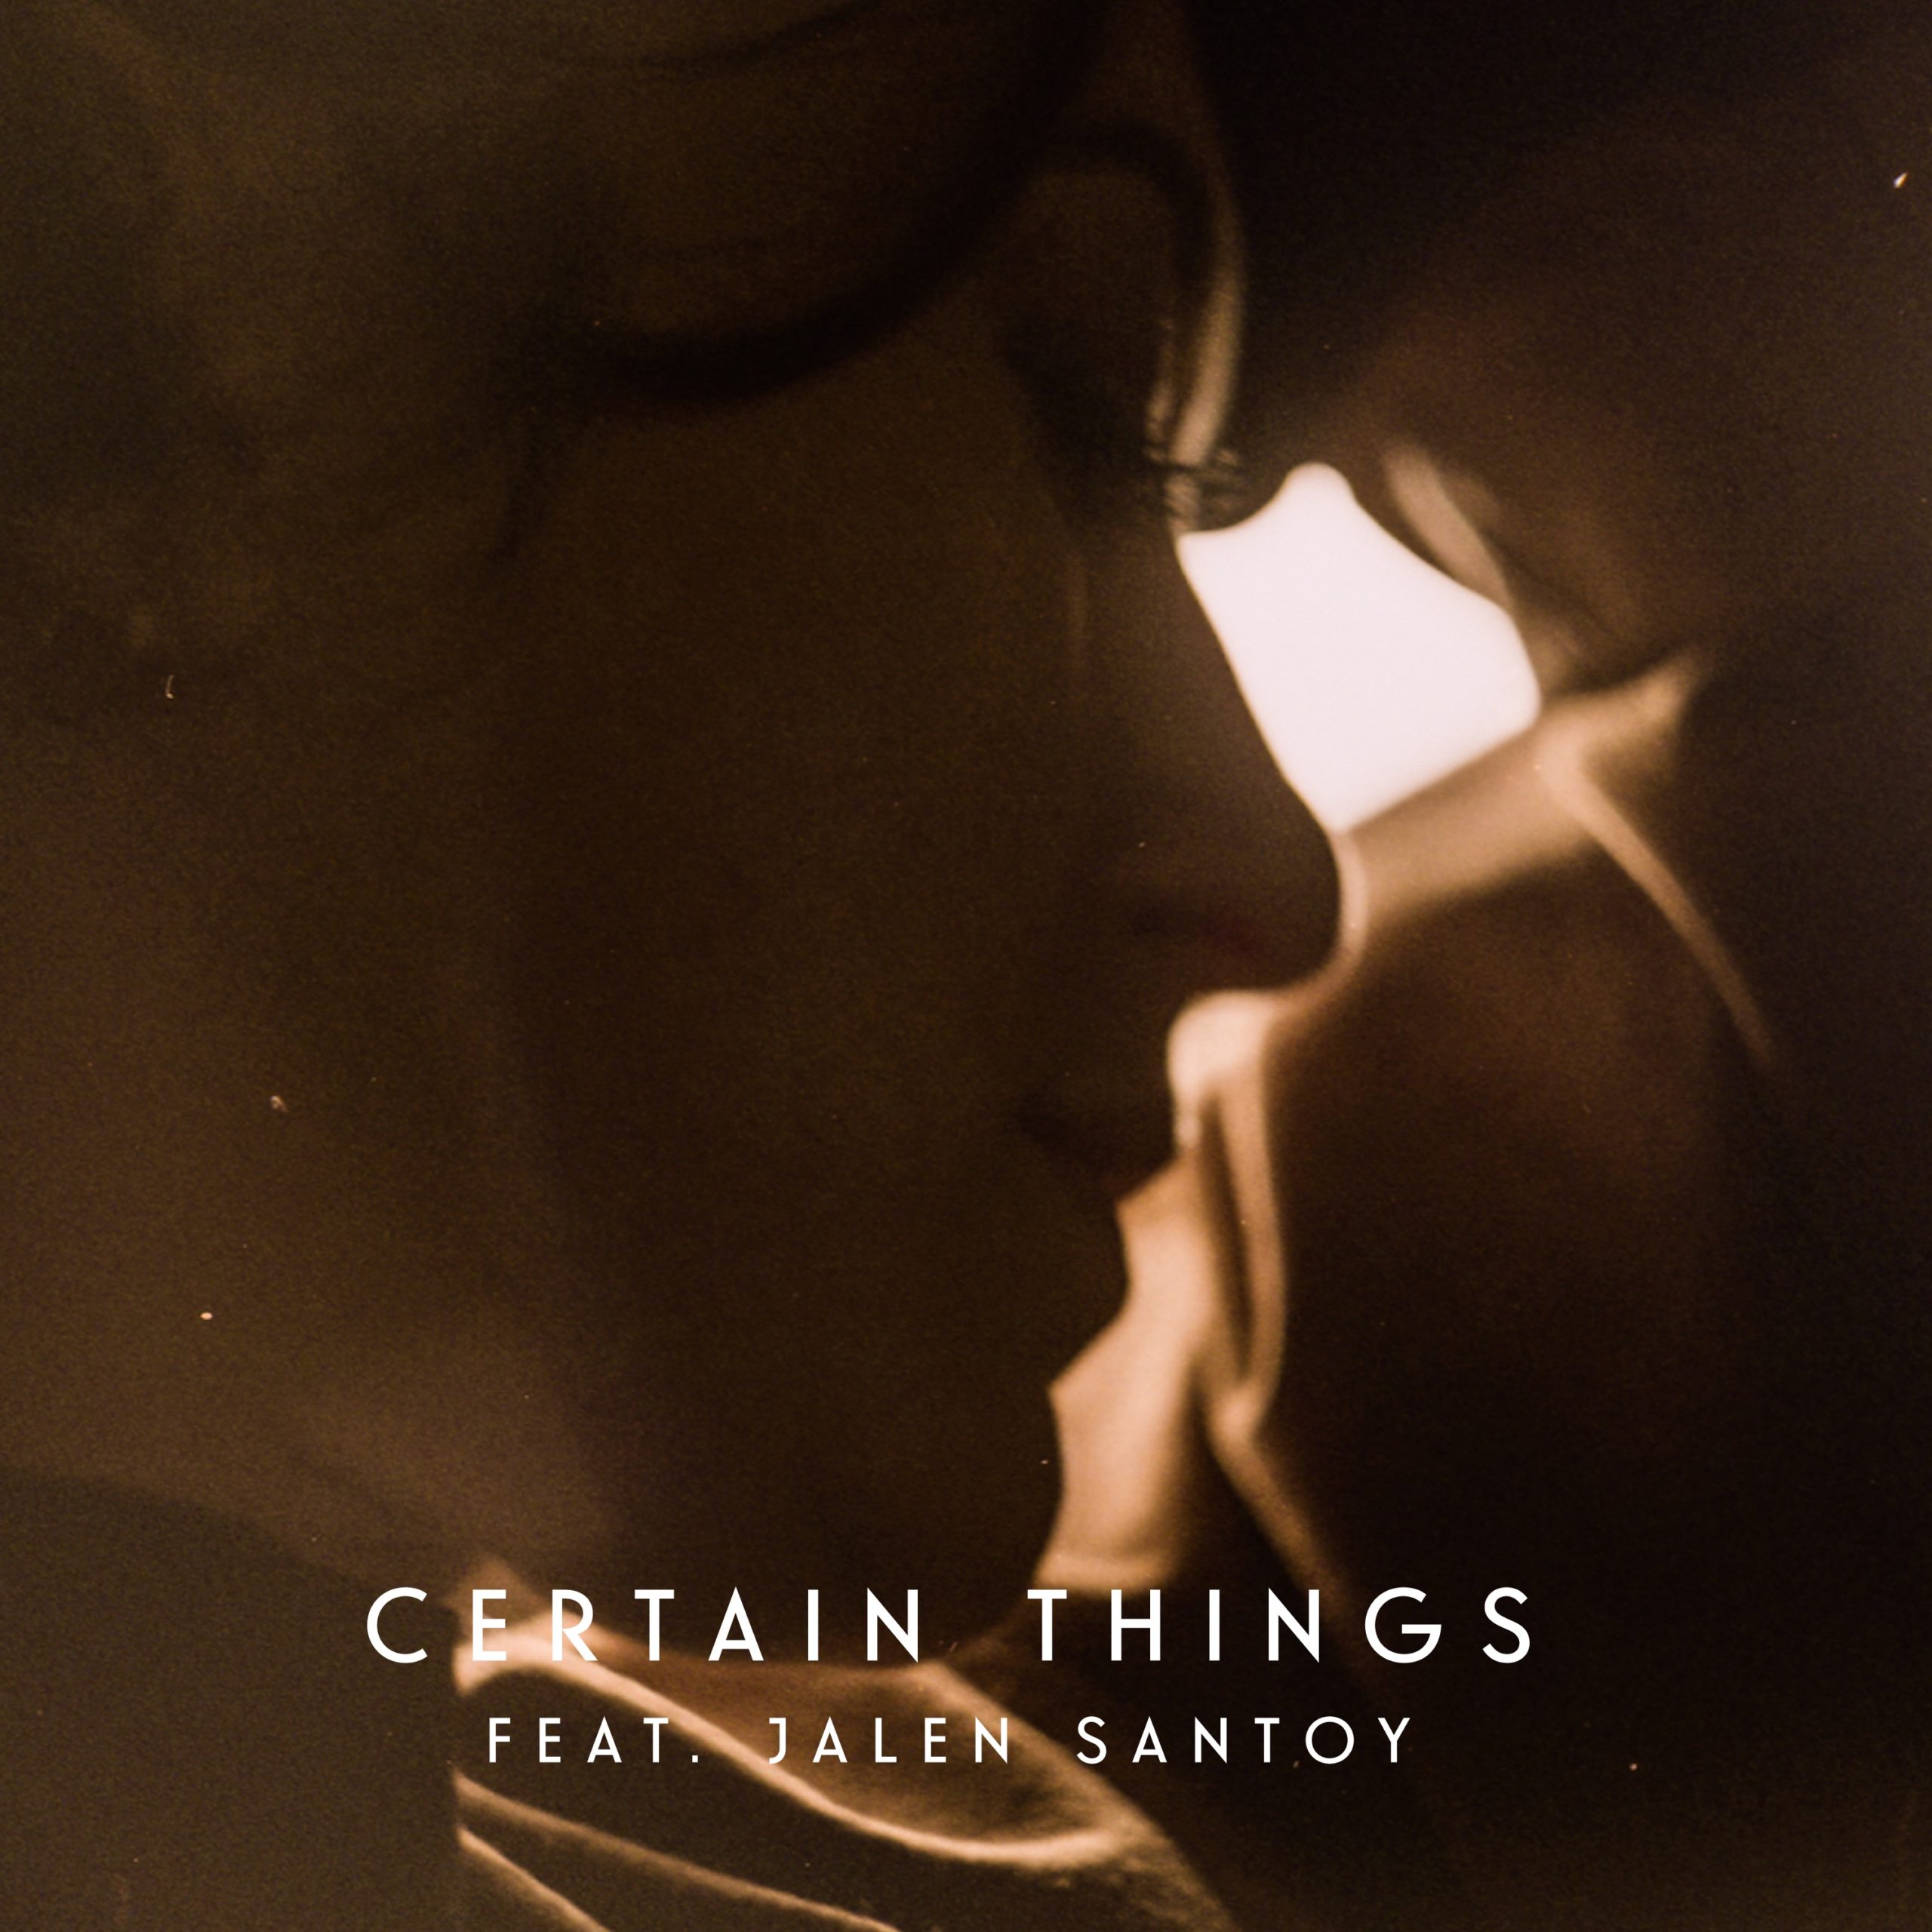 Lyves – “Certain Things” Feat. Jalen Santoy